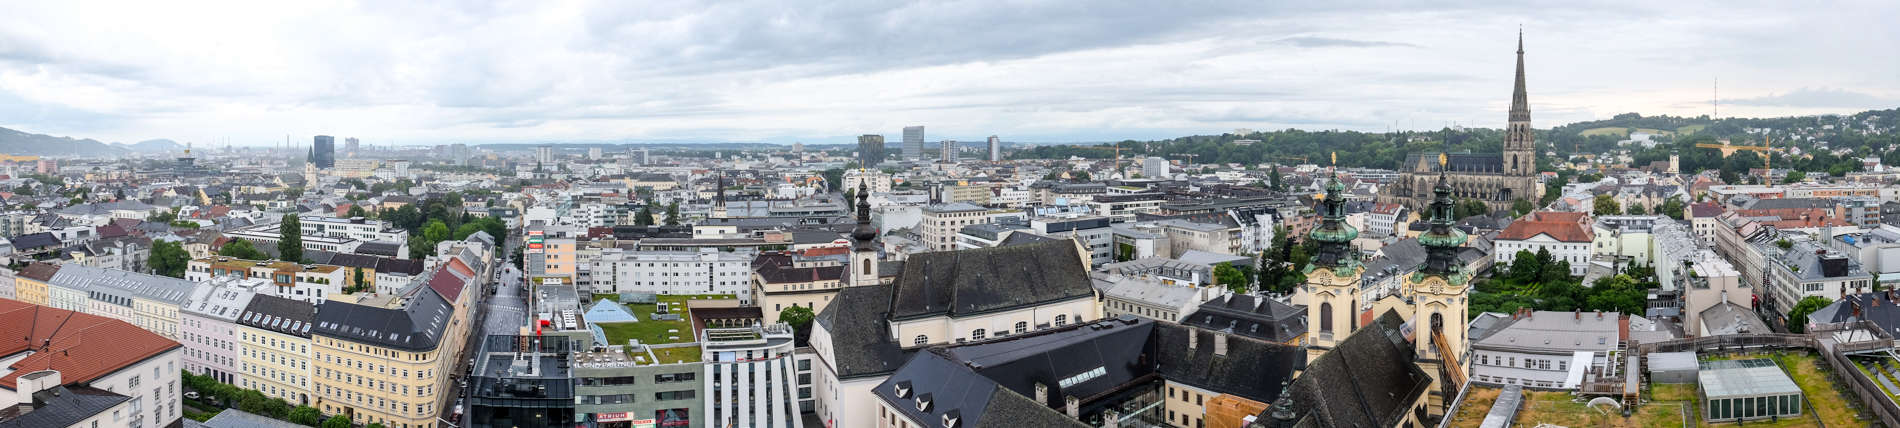 Panorama of the city skyline of Linz in Austria.